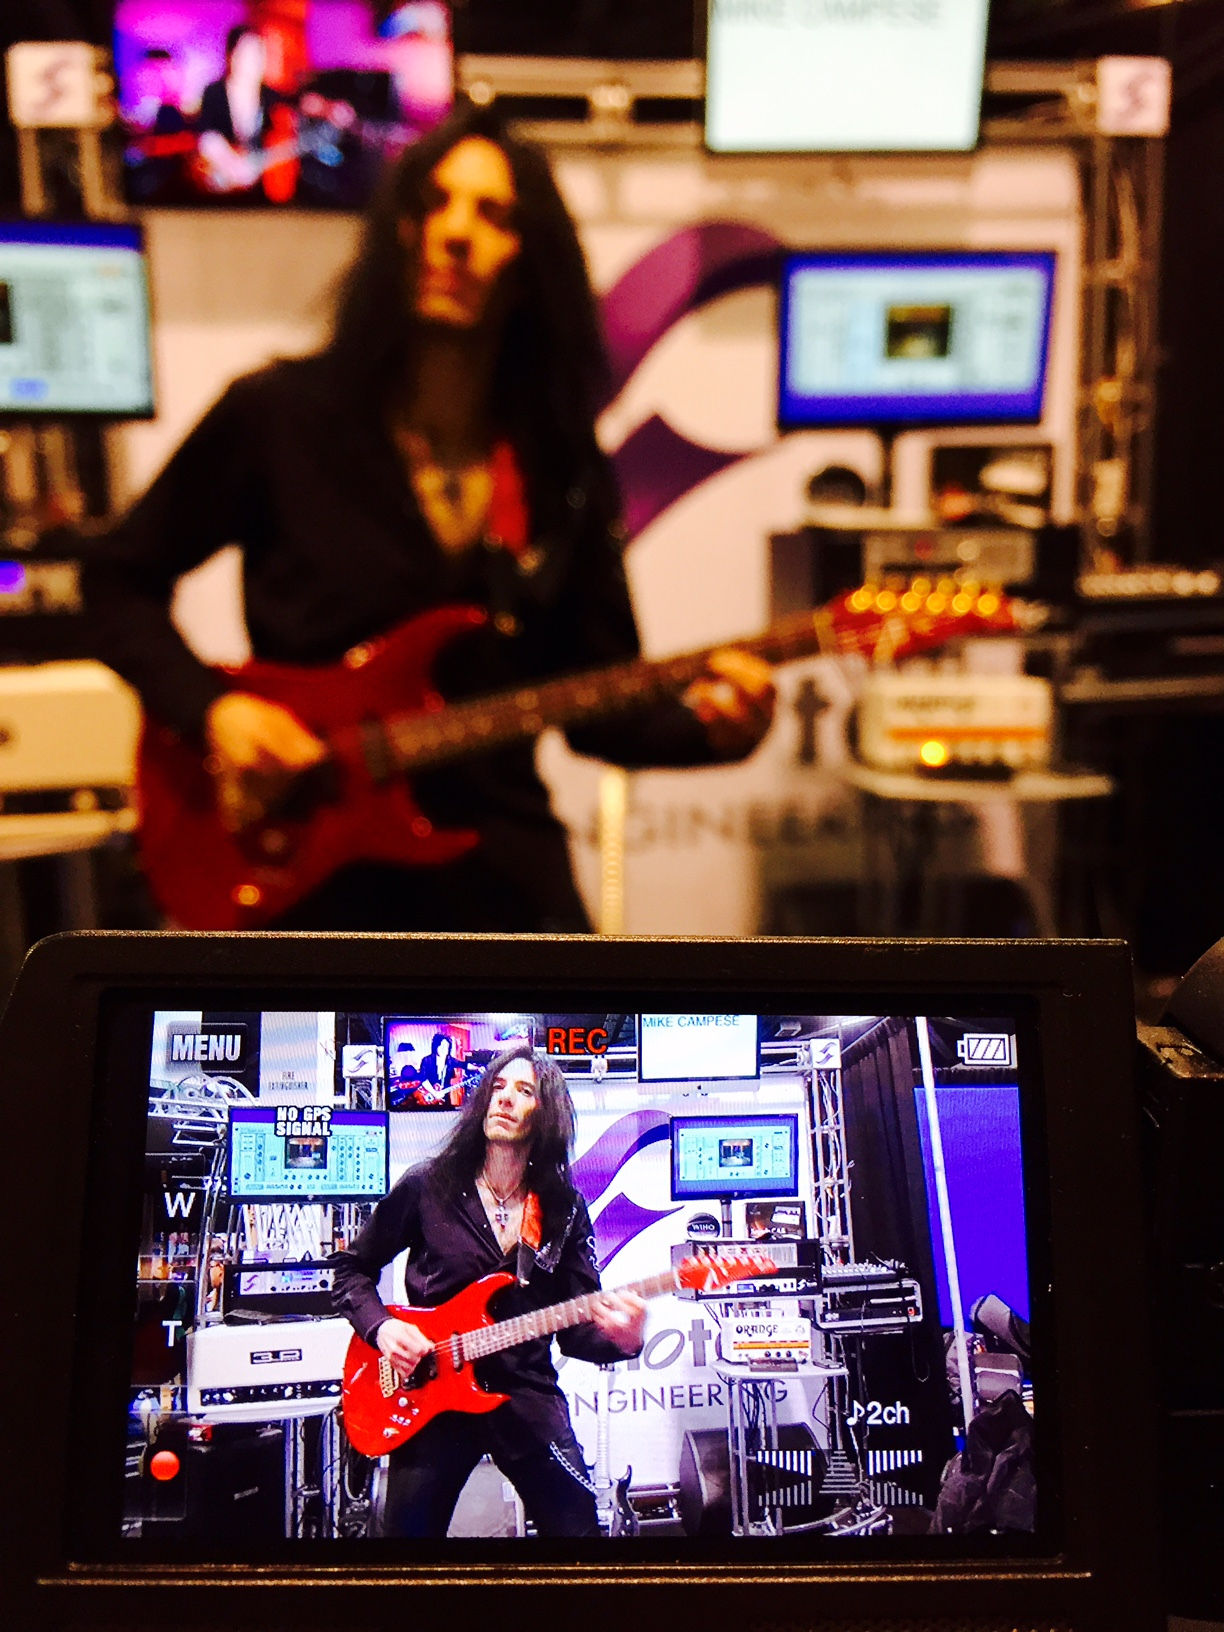 Mike Campese NAMM 2015 - Two Notes. Pic in a Pic.